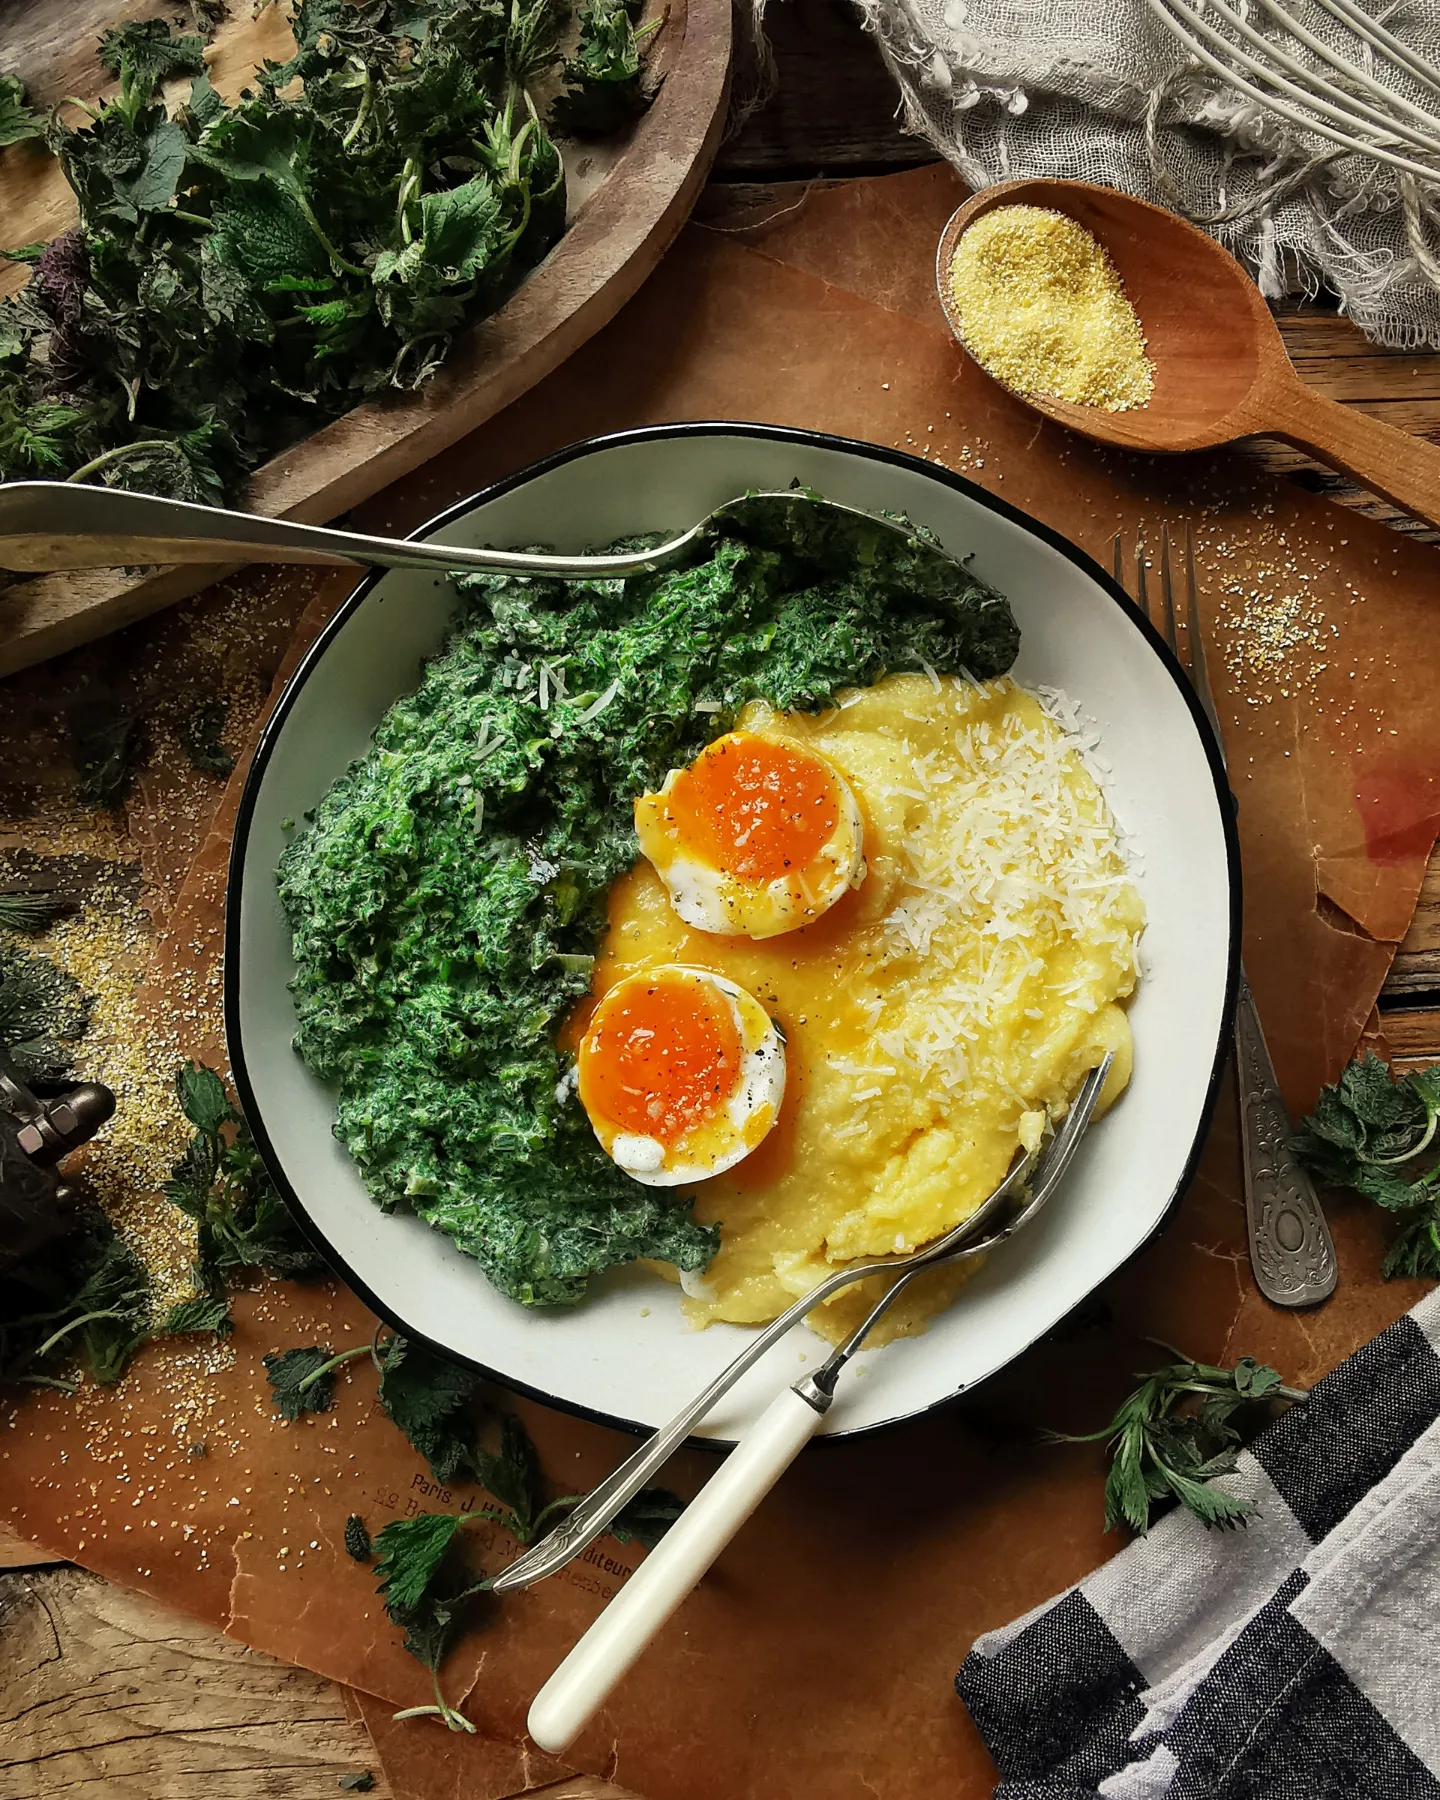 Nettles with polenta and soft egg